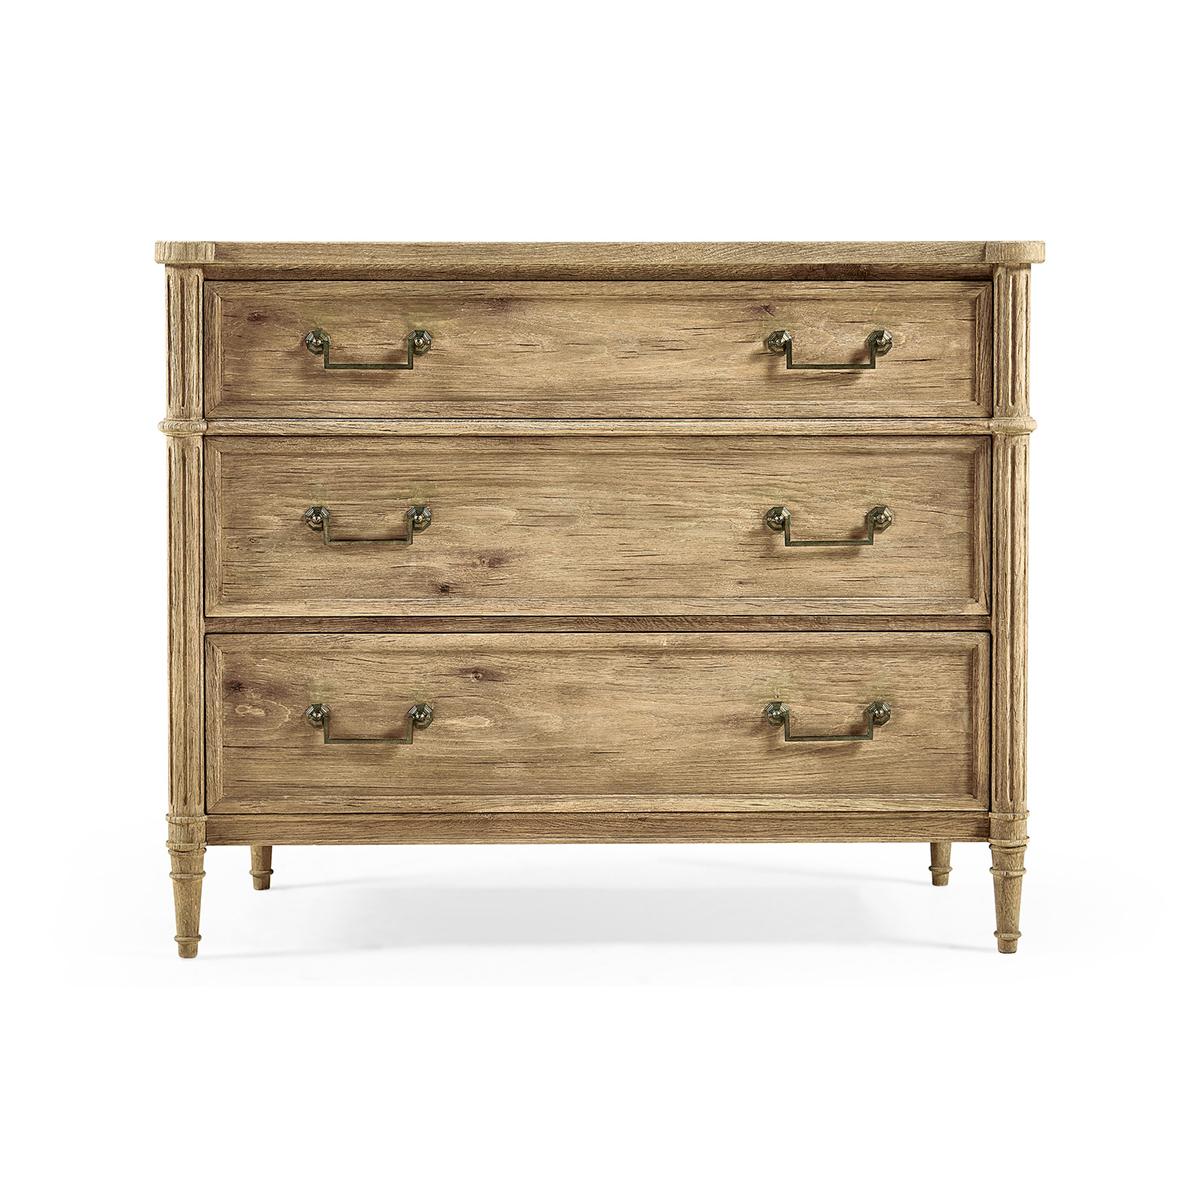 French Louis XVI Style Commode, made with chestnut in a natural stripped finish that marries effortlessly with custom-cast hardware. Turret corners, fluted styles, three long drawers and turned and tapered legs. A versatile piece that elevates both